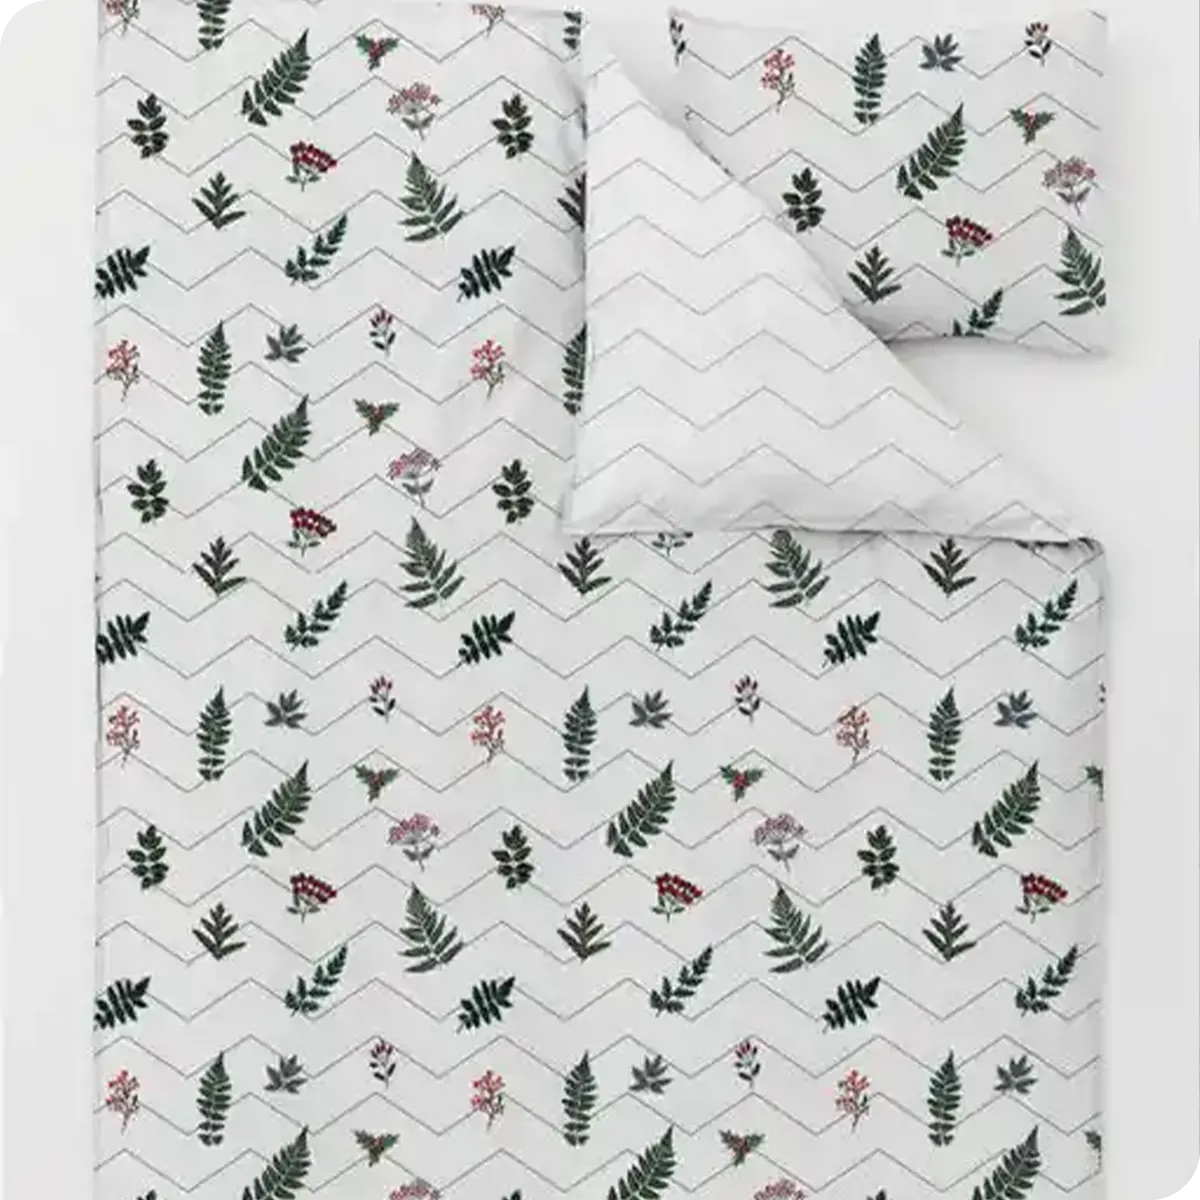 Festive Christmas Quilt Set - Cozy Bedding for Holiday Nights detail1